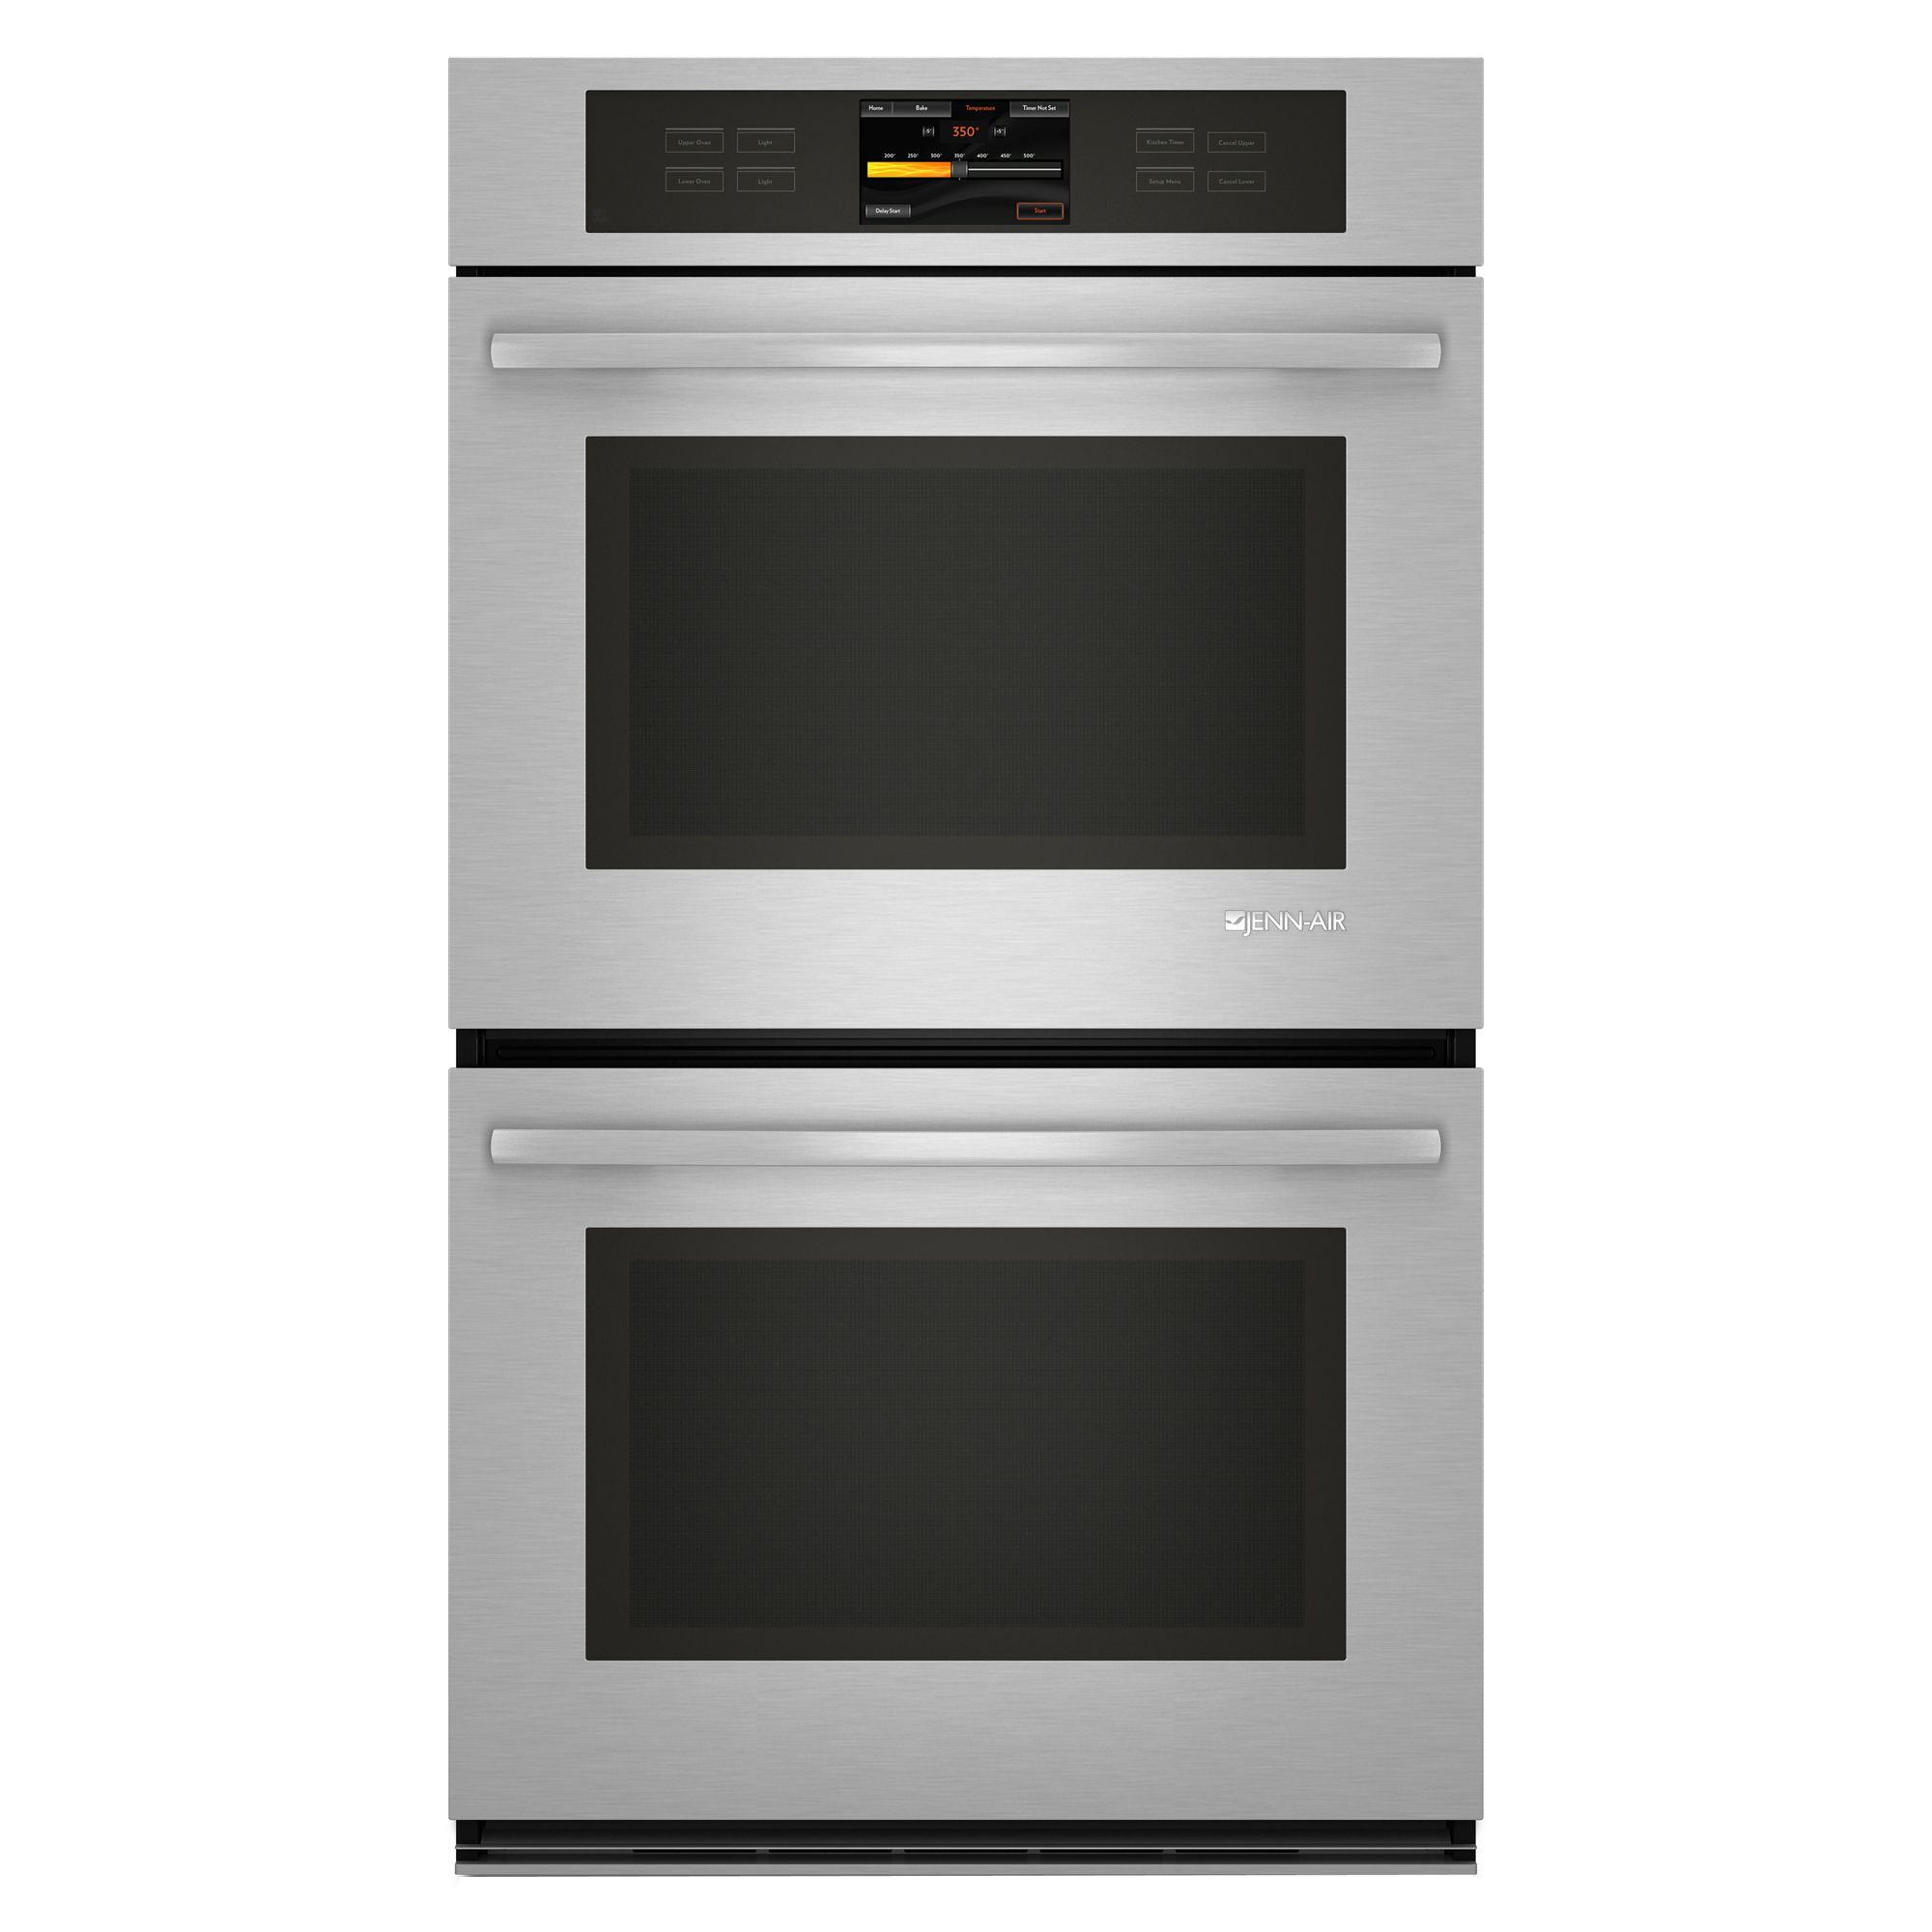 30" Electric Built-In Double Wall Oven logo